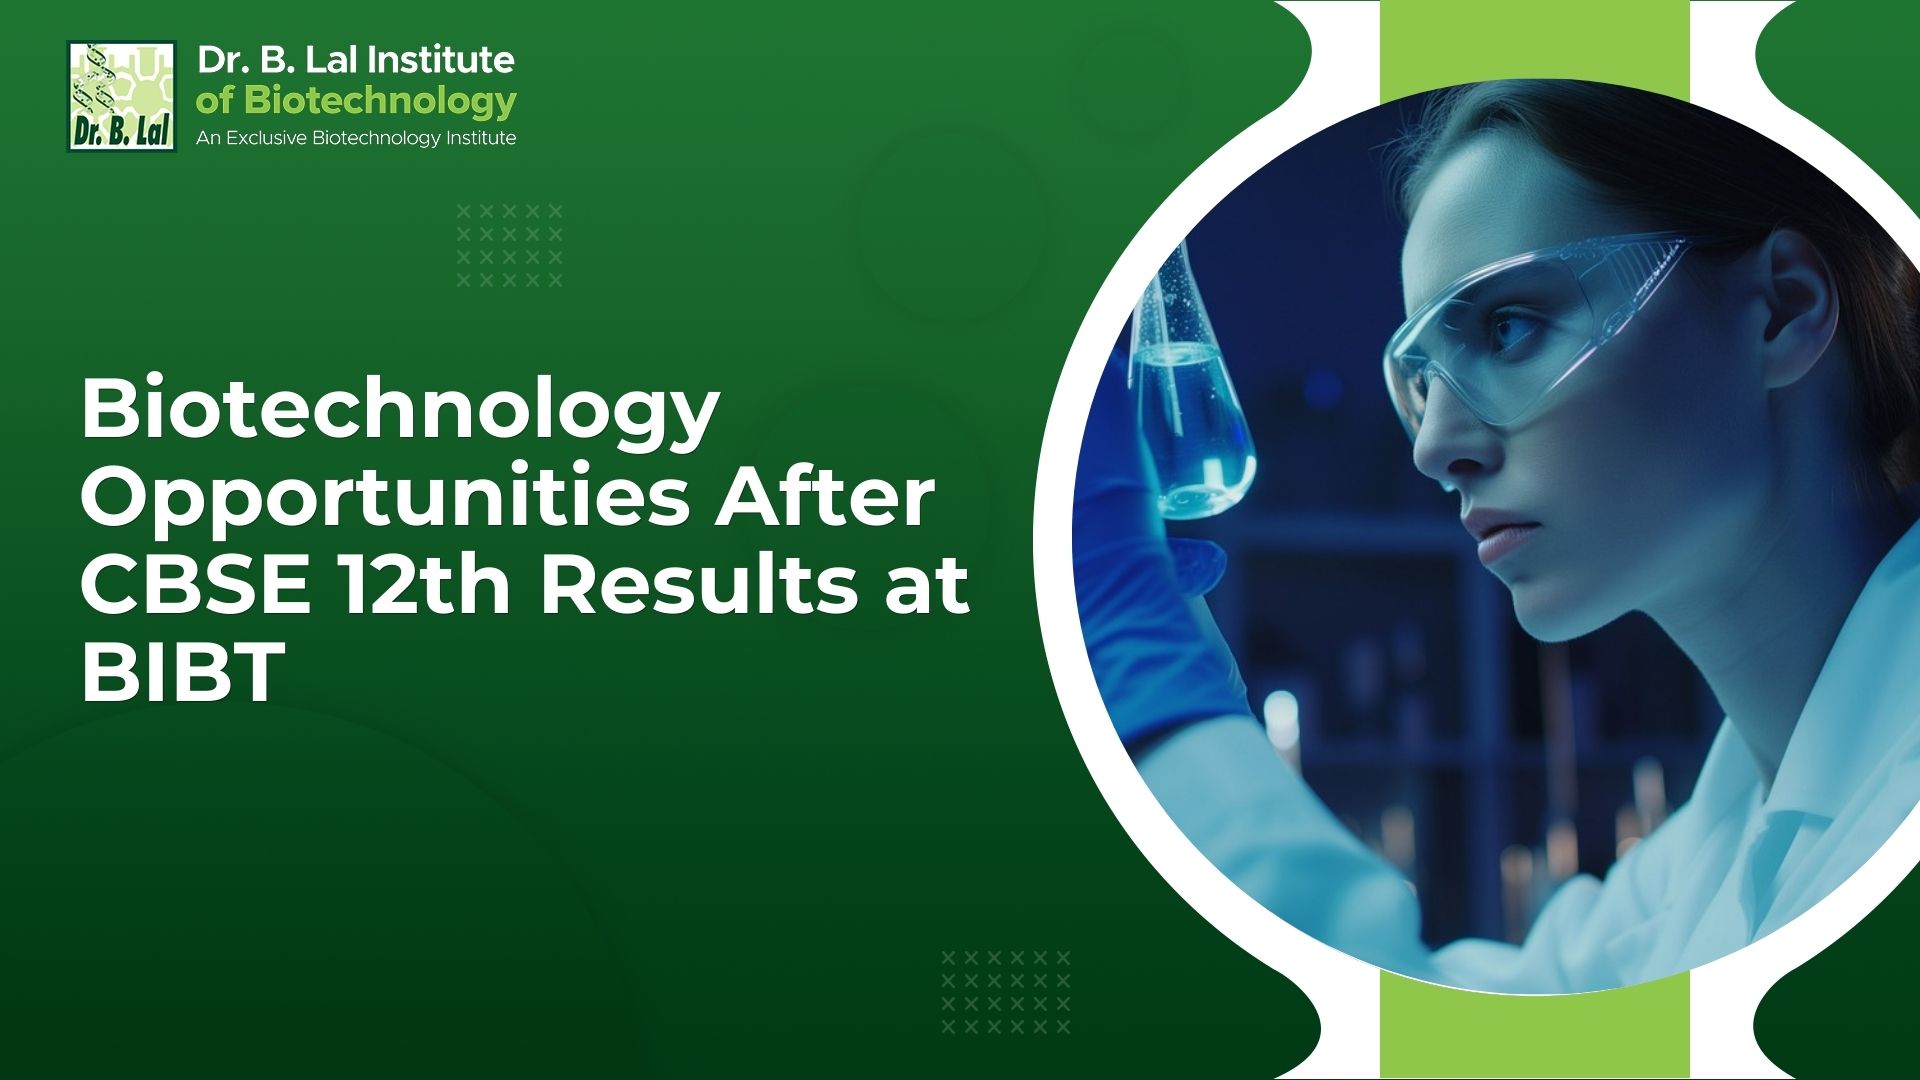 Biotechnology Opportunities After CBSE 12th Results at BIBT